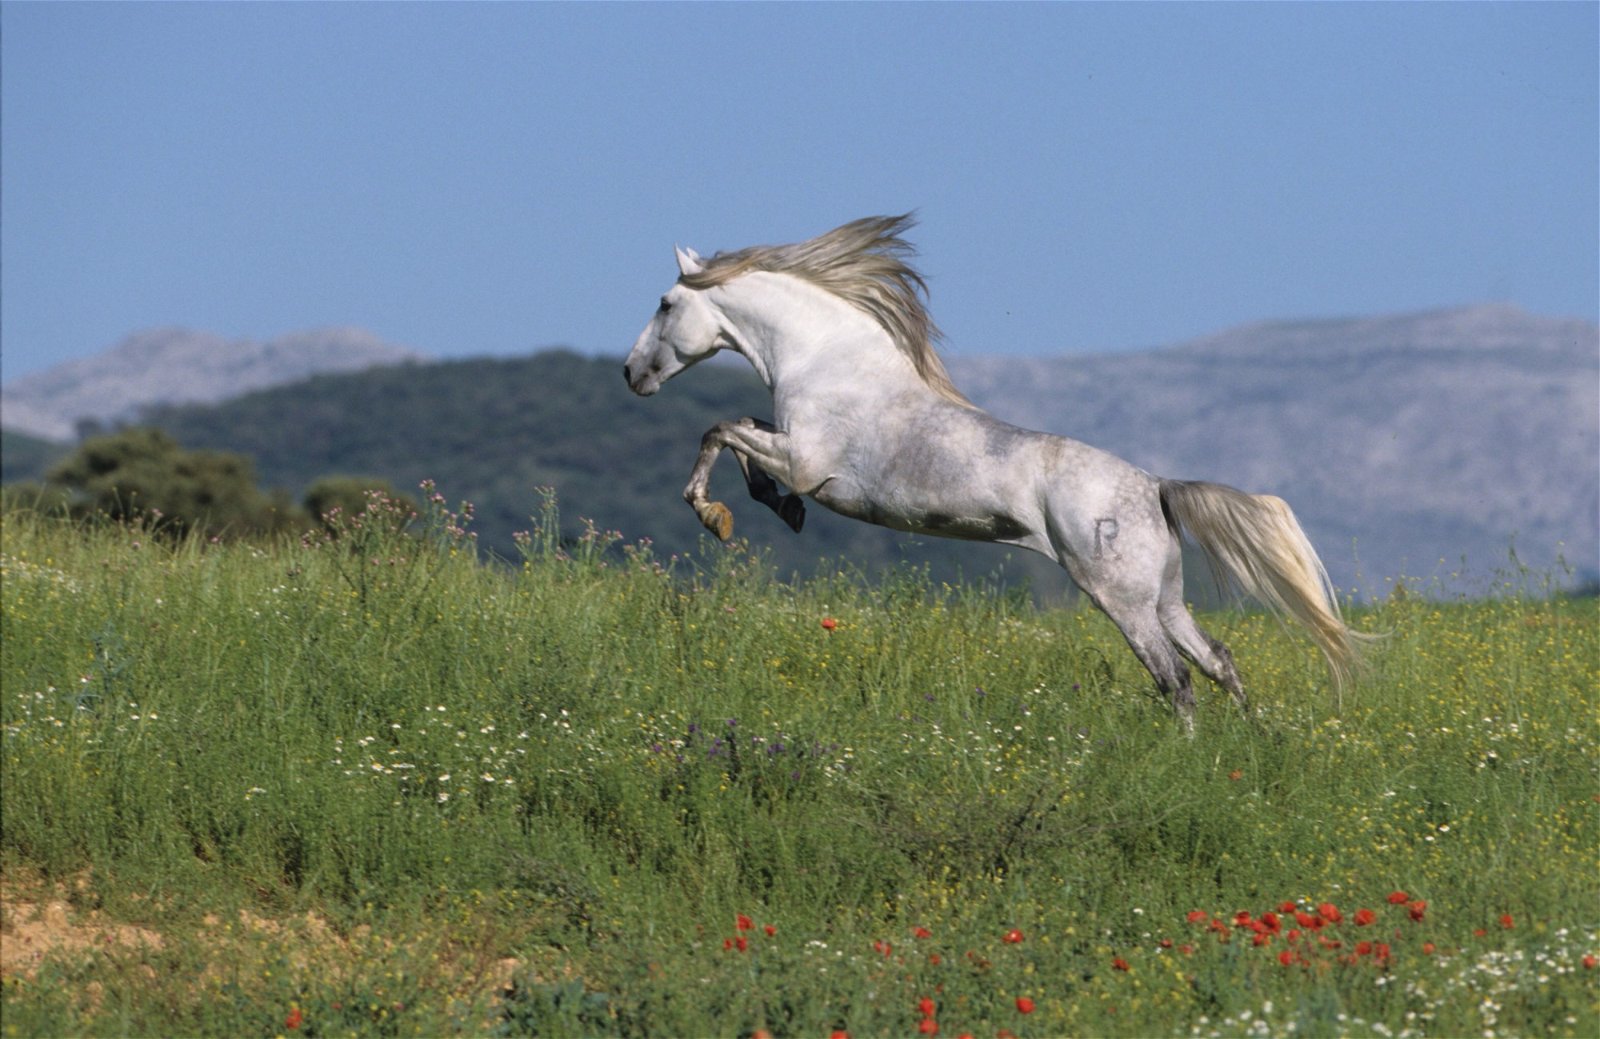 White horse jumping in a field